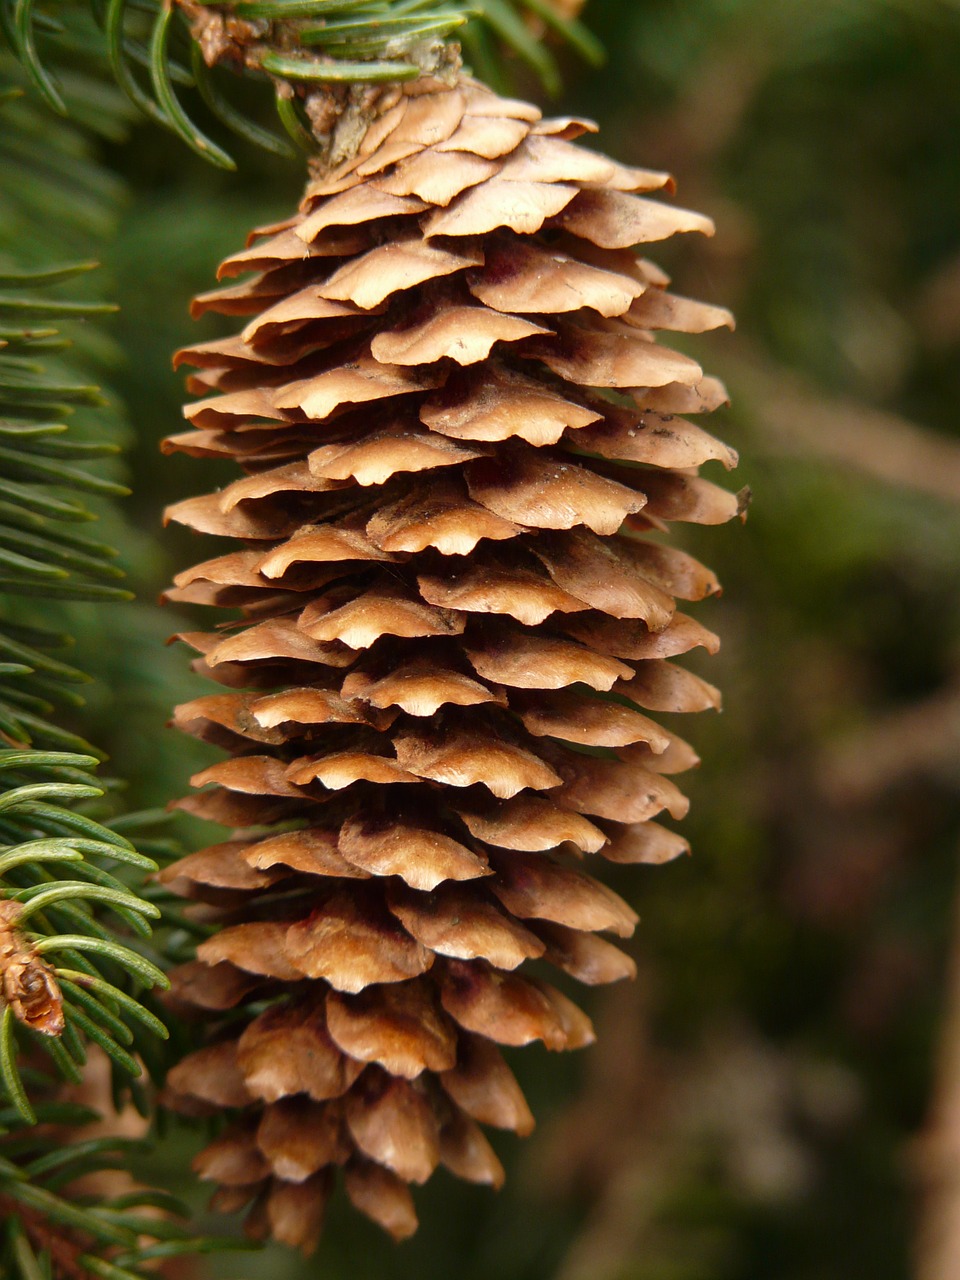 pine cones,tap,tree,conifer,common spruce,picea abies,red spruce,spruce,picea,ripe,seeds,free pictures, free photos, free images, royalty free, free illustrations, public domain